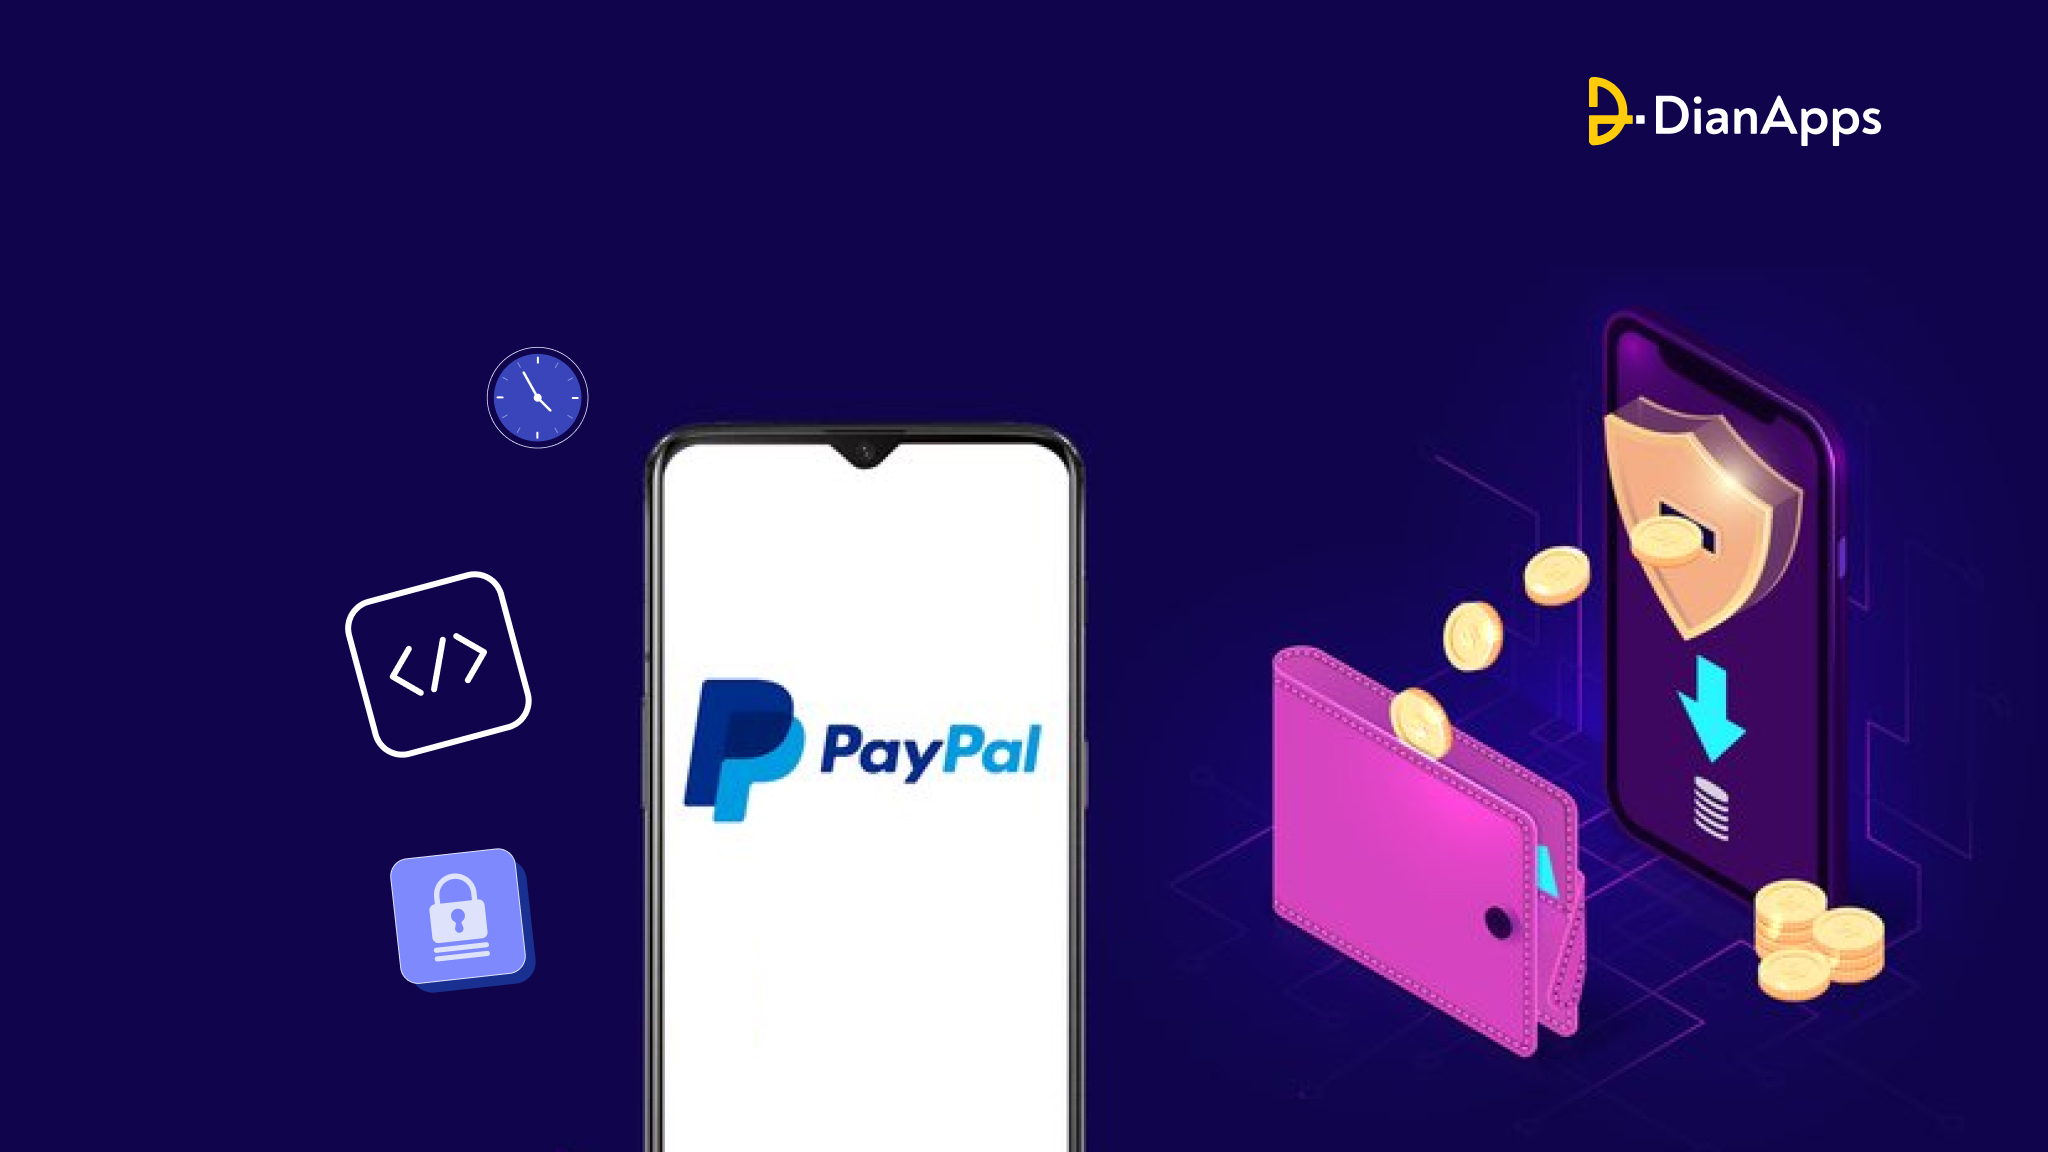 payment app like PayPal